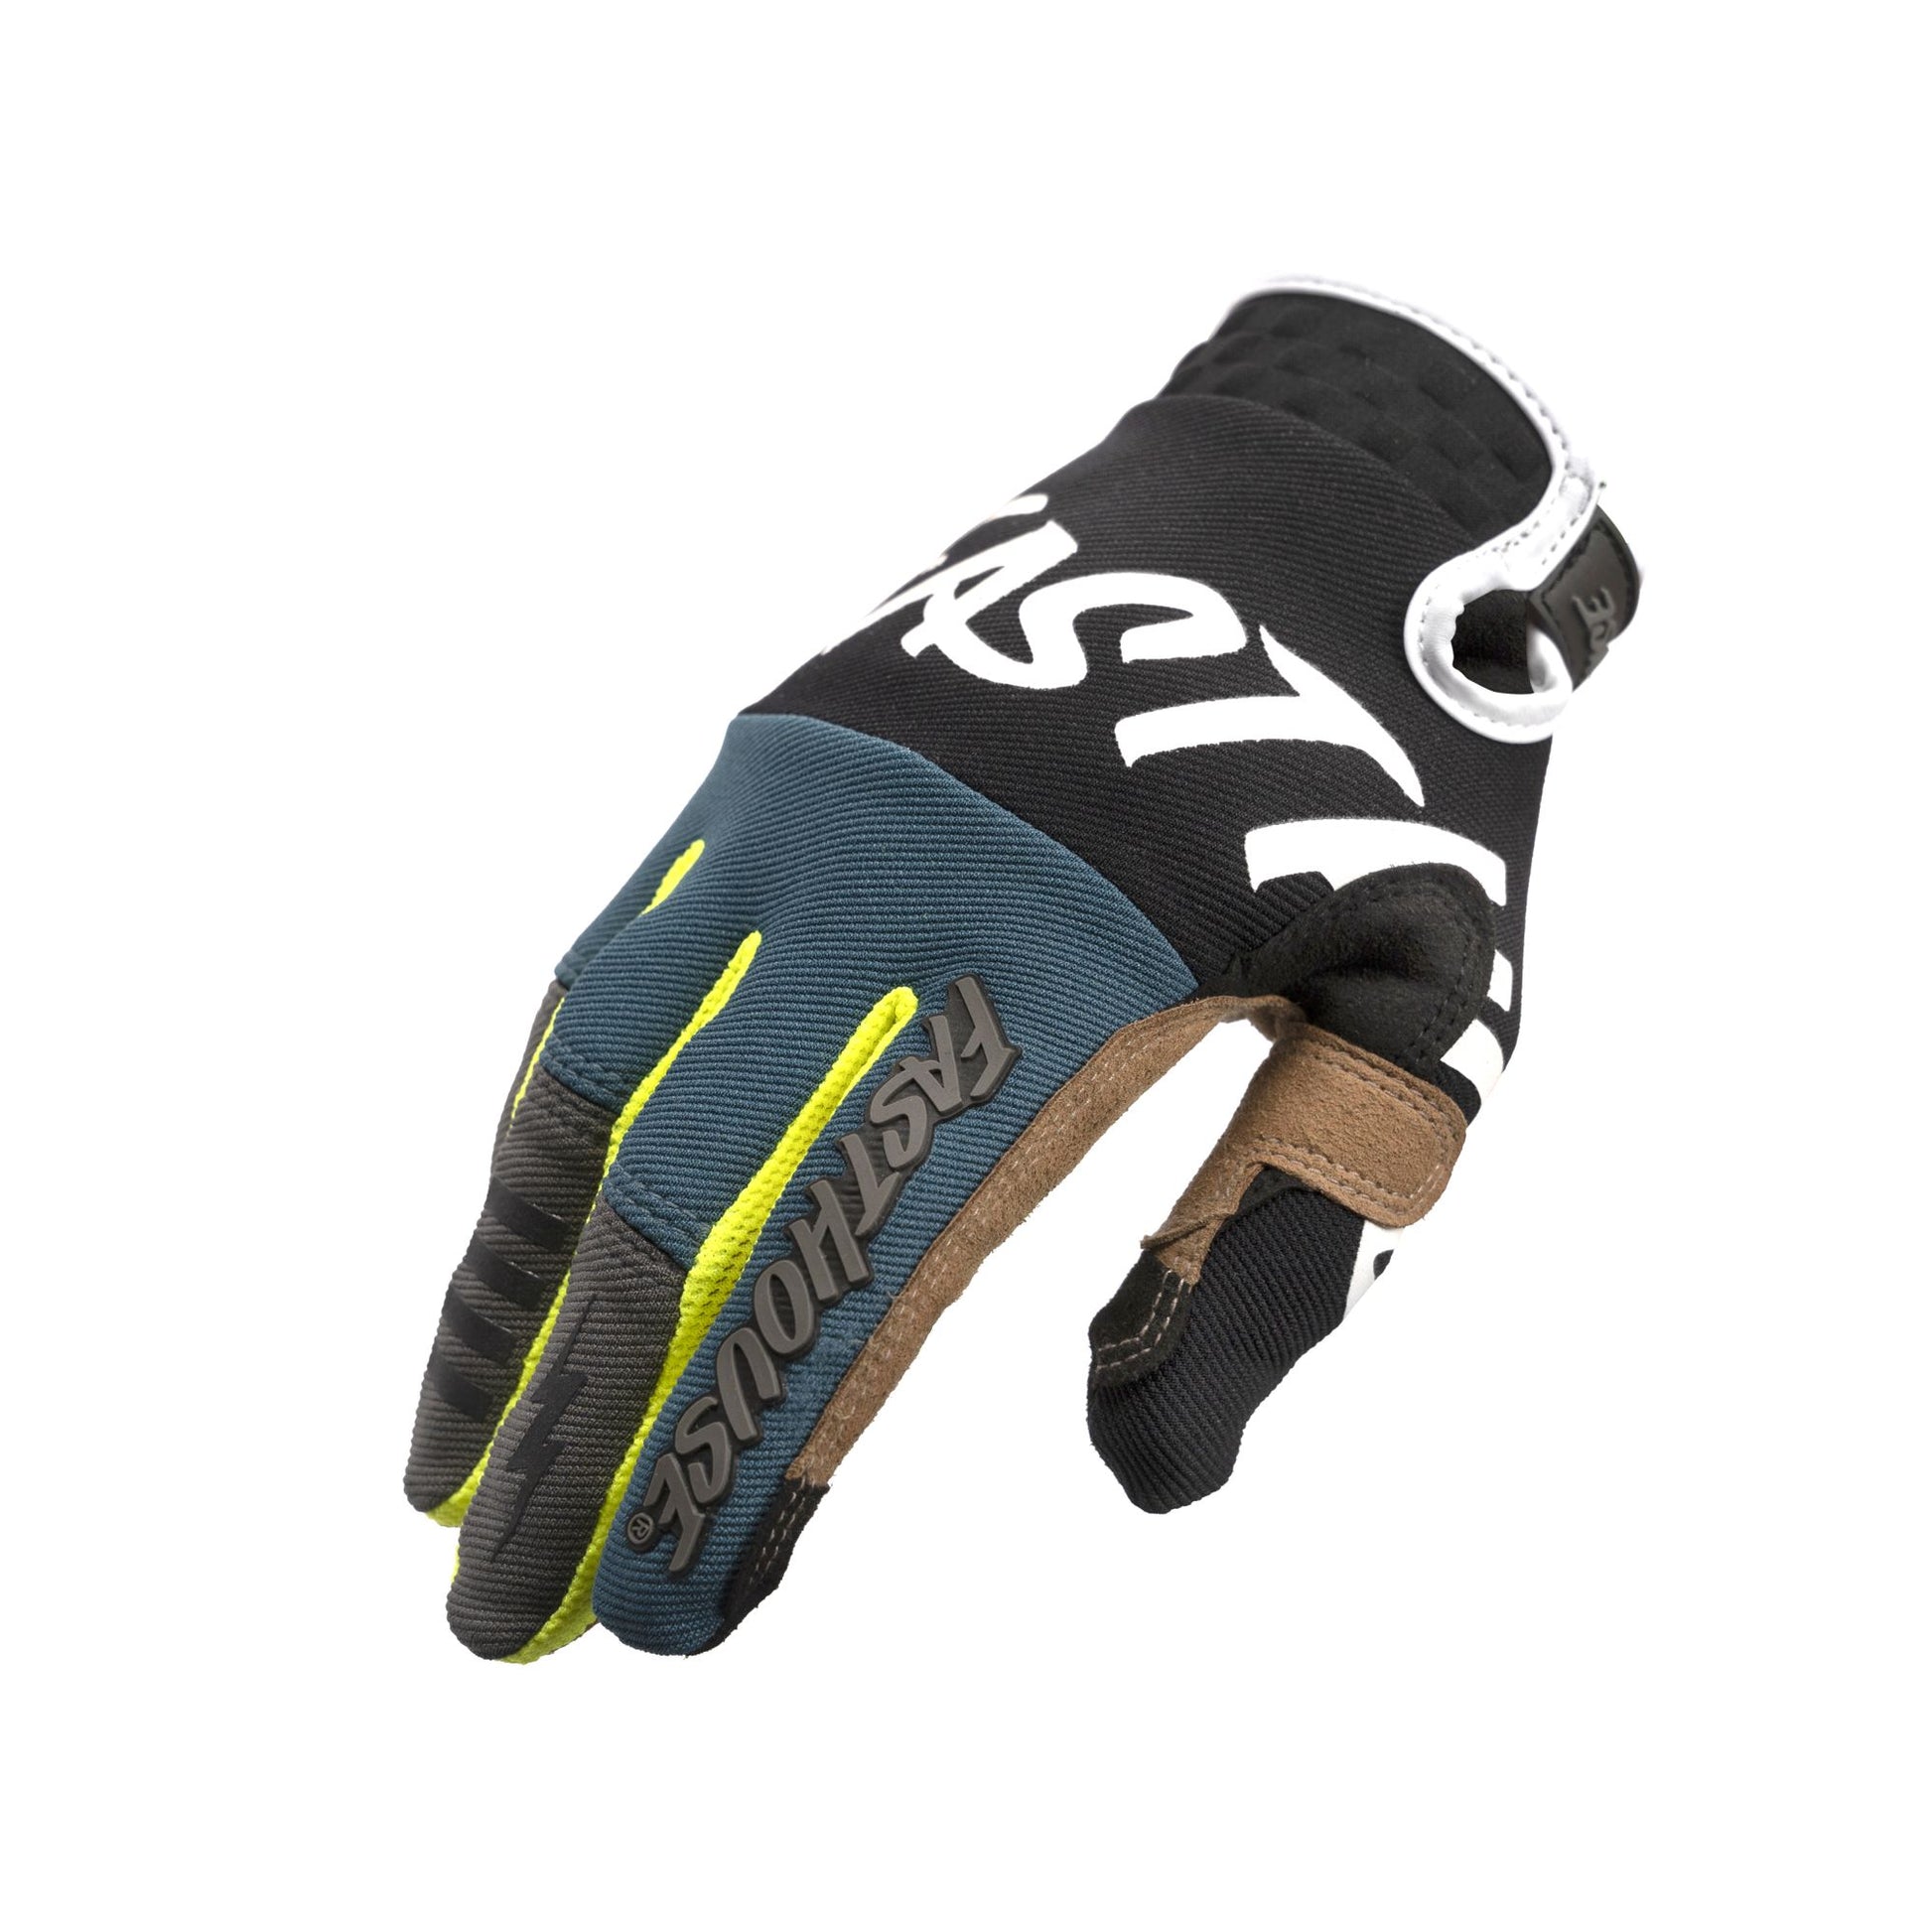 Fasthouse Youth Speed Style Glove Sector - Black/Indigo Bike Gloves